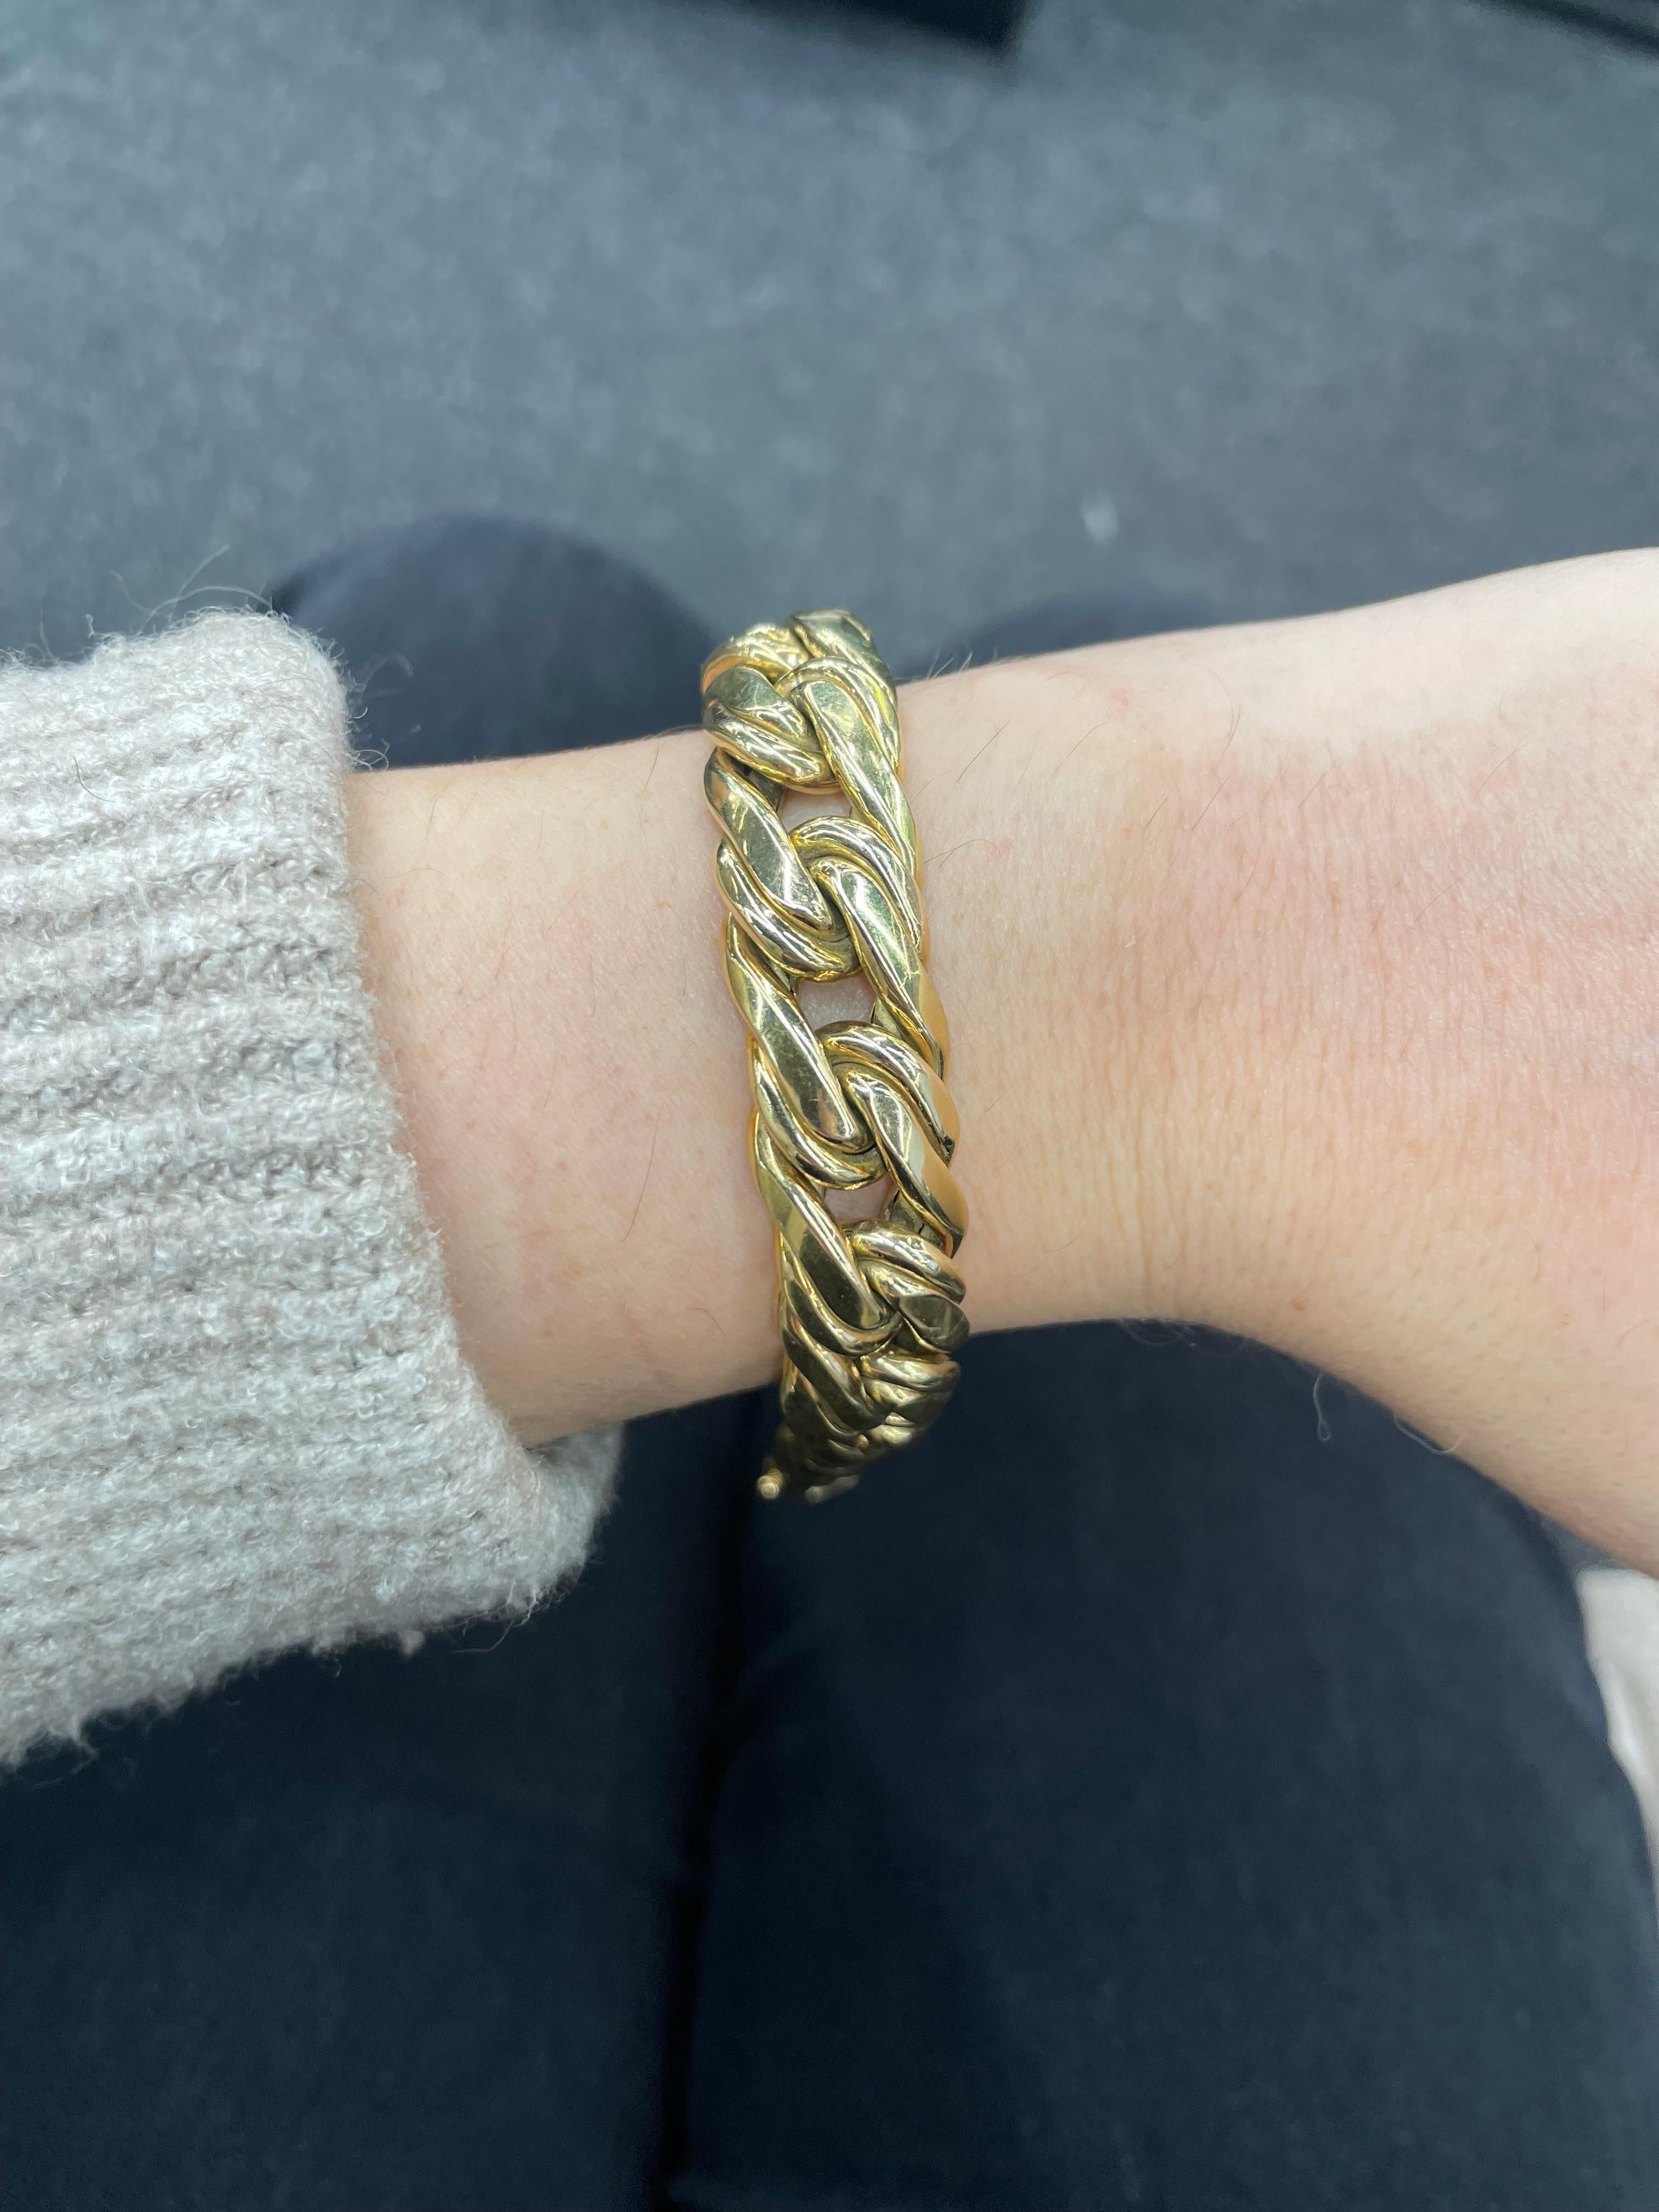 14 Karat Yellow Gold Link bracelet weighing 32.5 grams, made in Italy.
More Link bracelets in stock.
Search Harbor Diamonds.